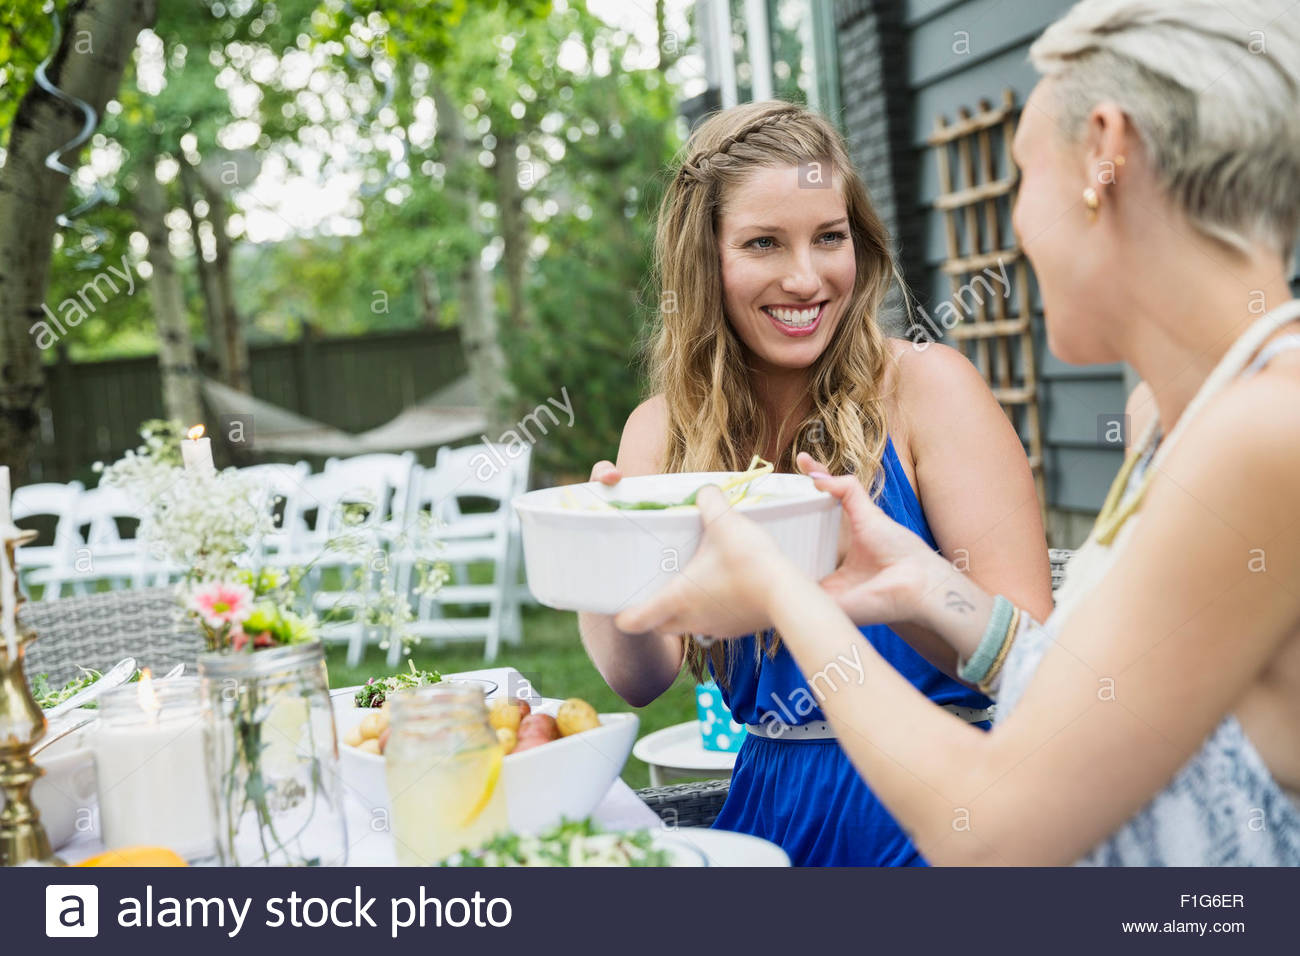 Smiling women passing food at garden party lunch Stock Photo